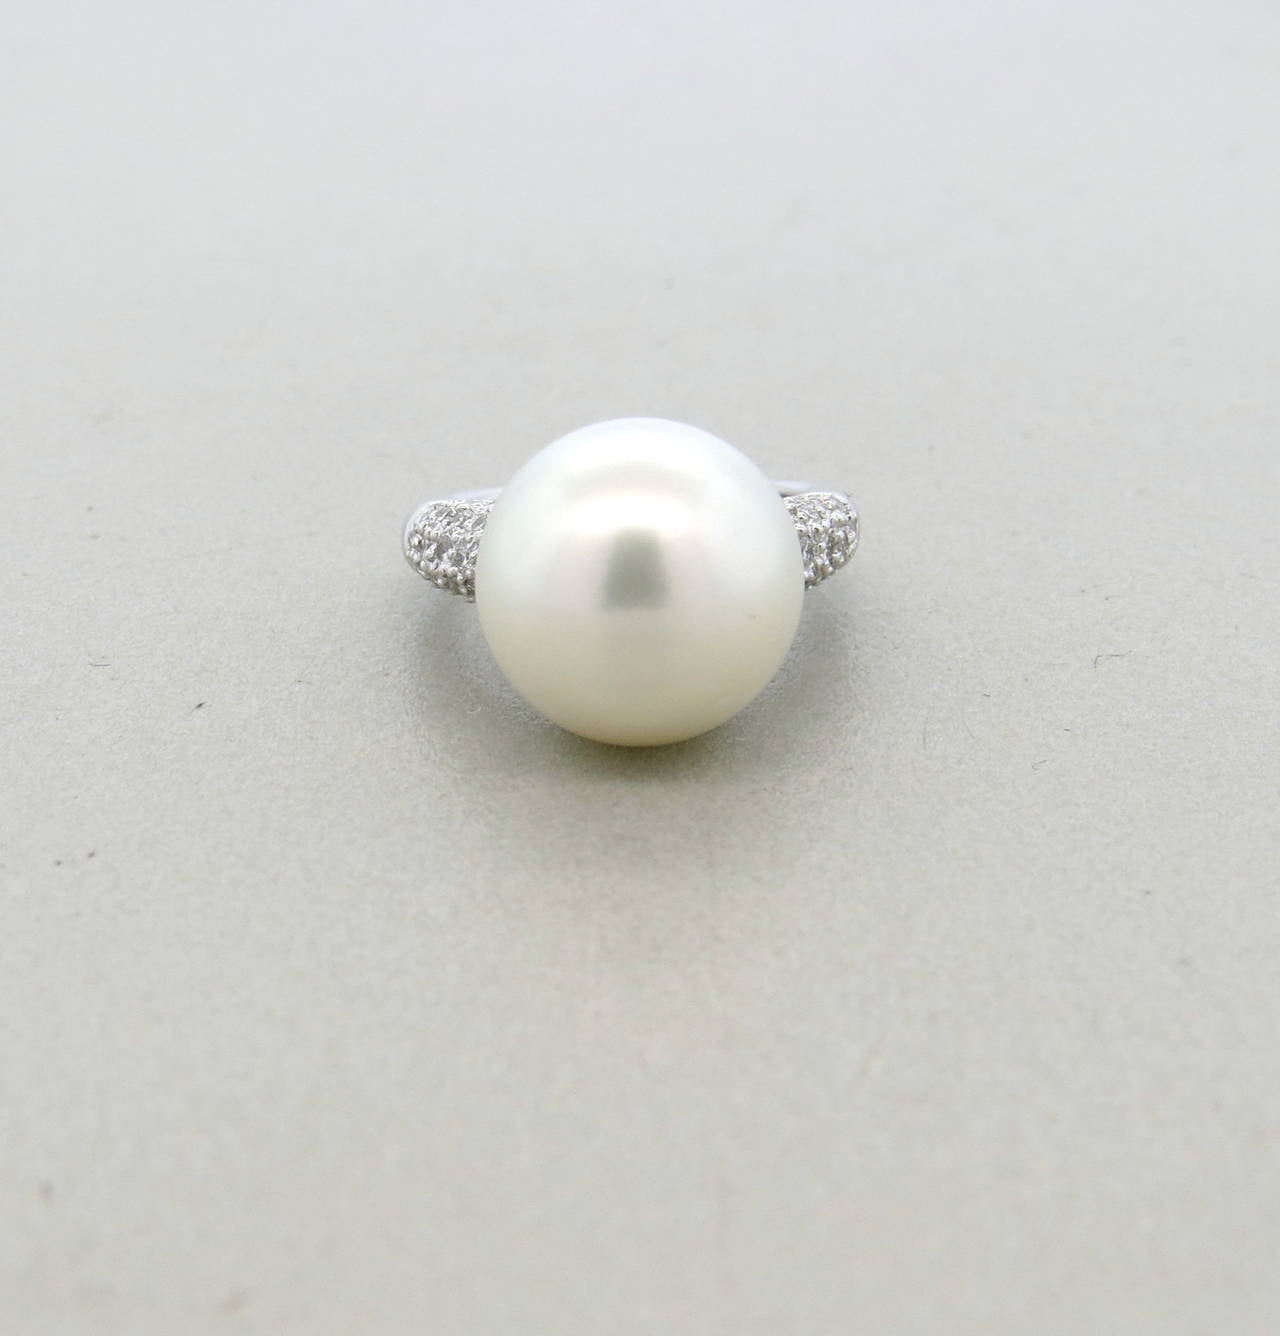 Platinum cocktail ring featuring a 12.7mm South Sea pearl decorated with approximately 0.60ctw of diamonds. Ring size 4.25. Marked Plat, 060. Ring weighs 9.1 grams.